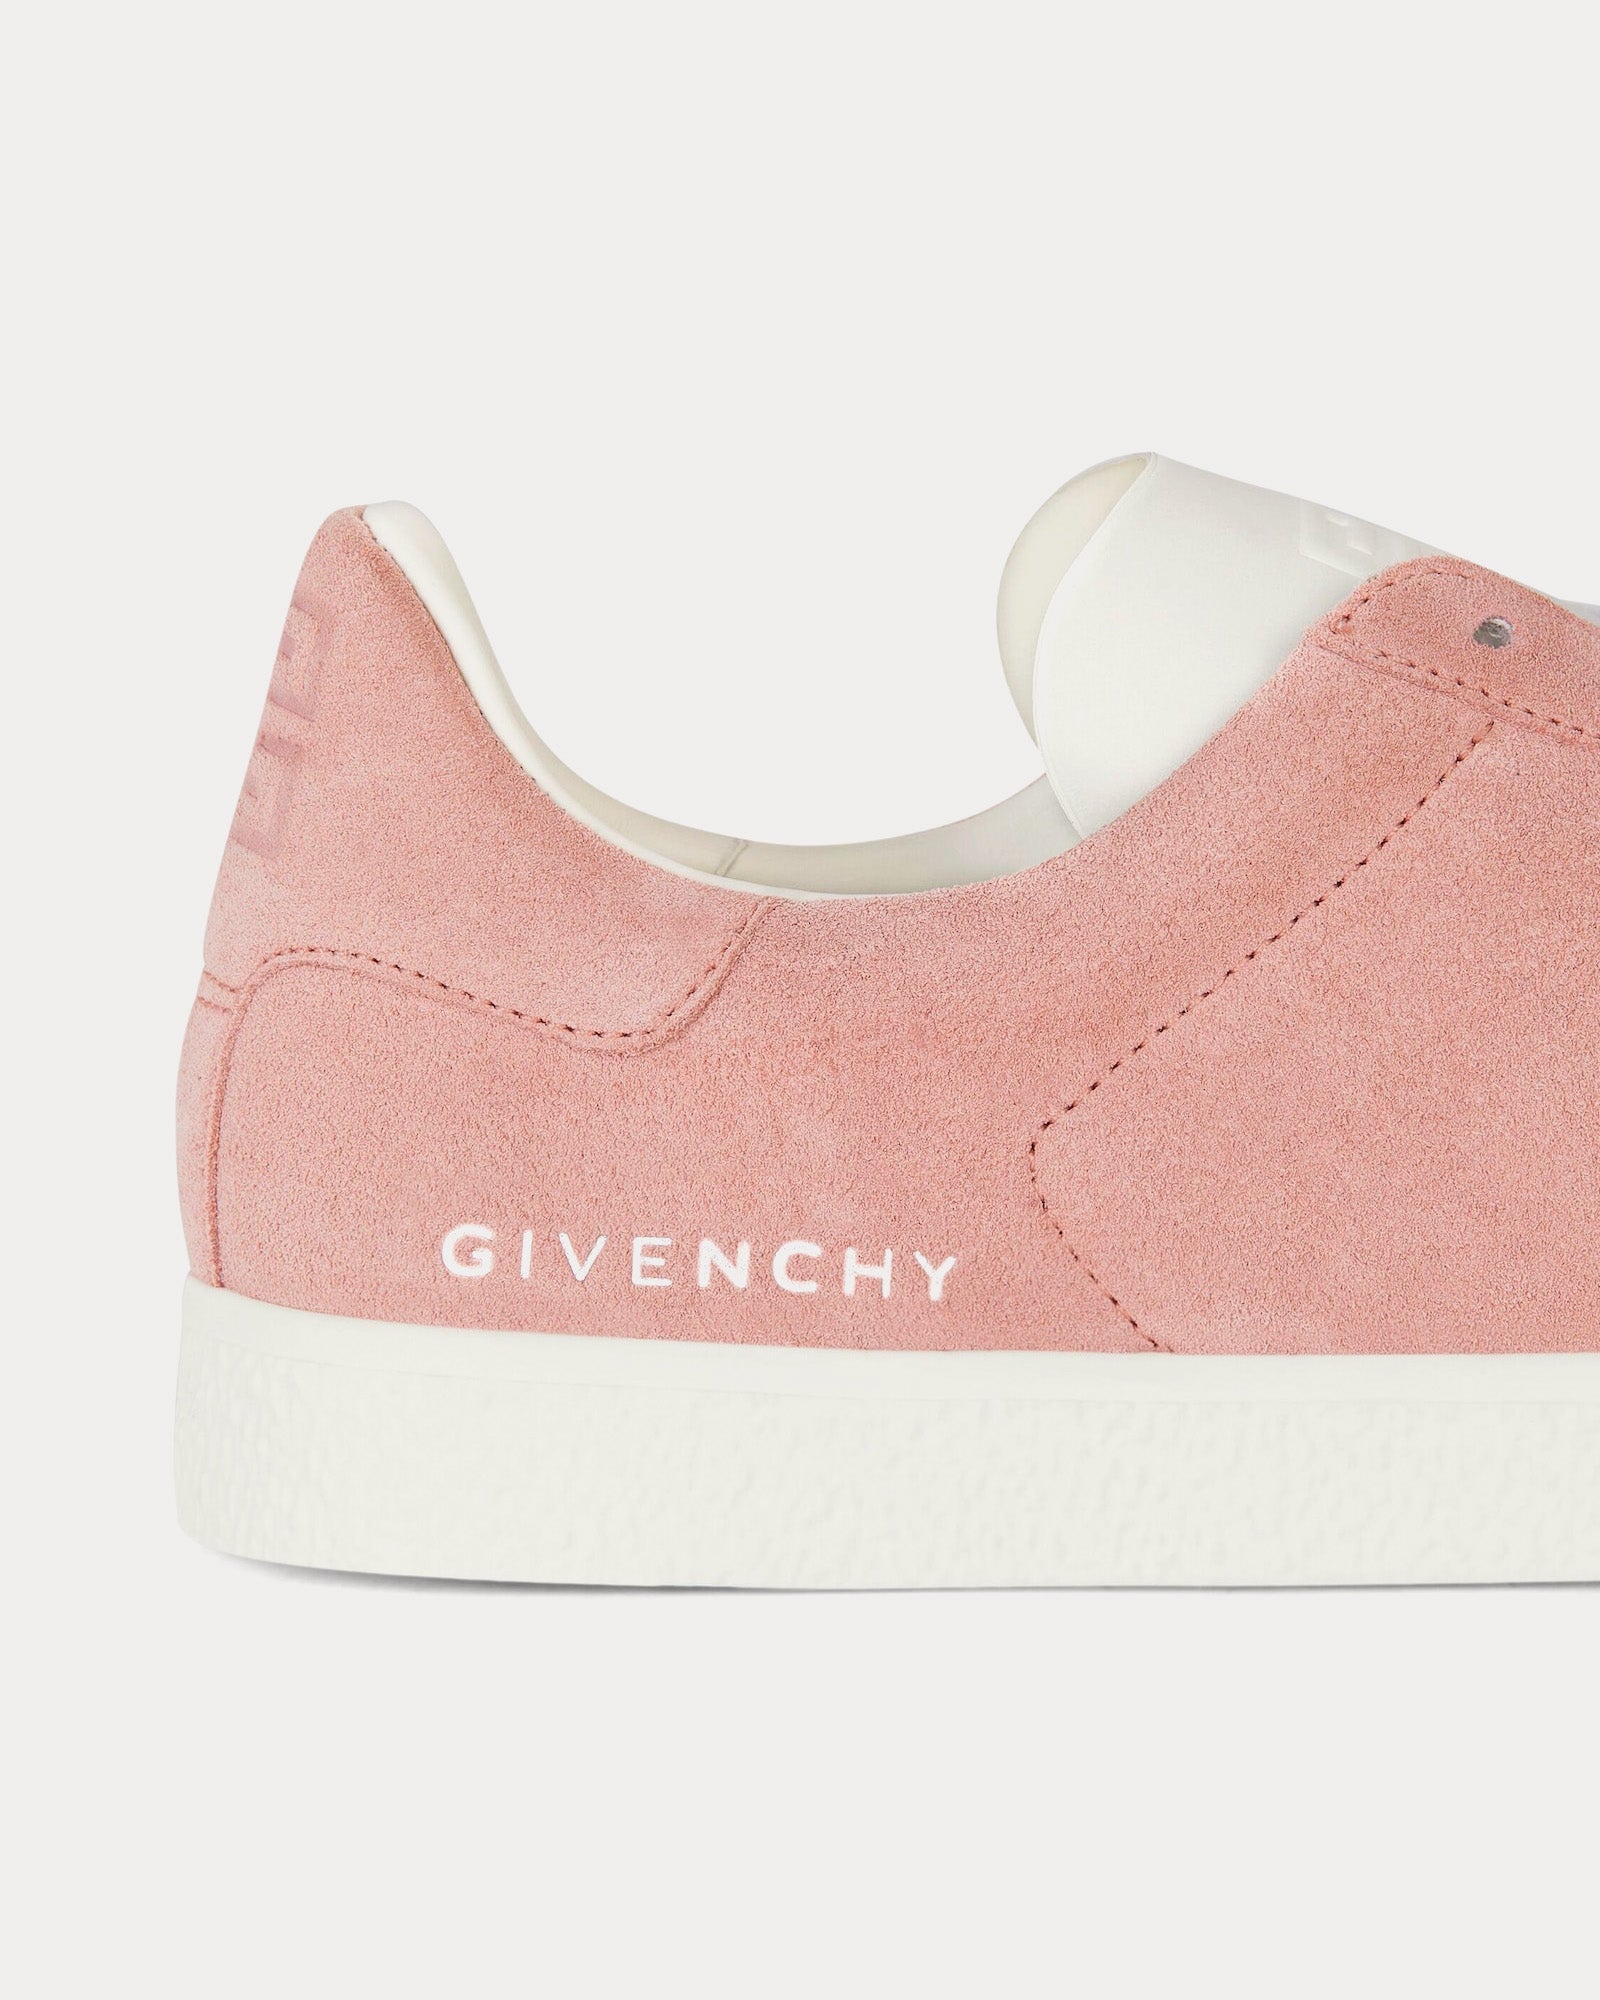 Givenchy - Town Suede Old Pink Low Top Sneakers